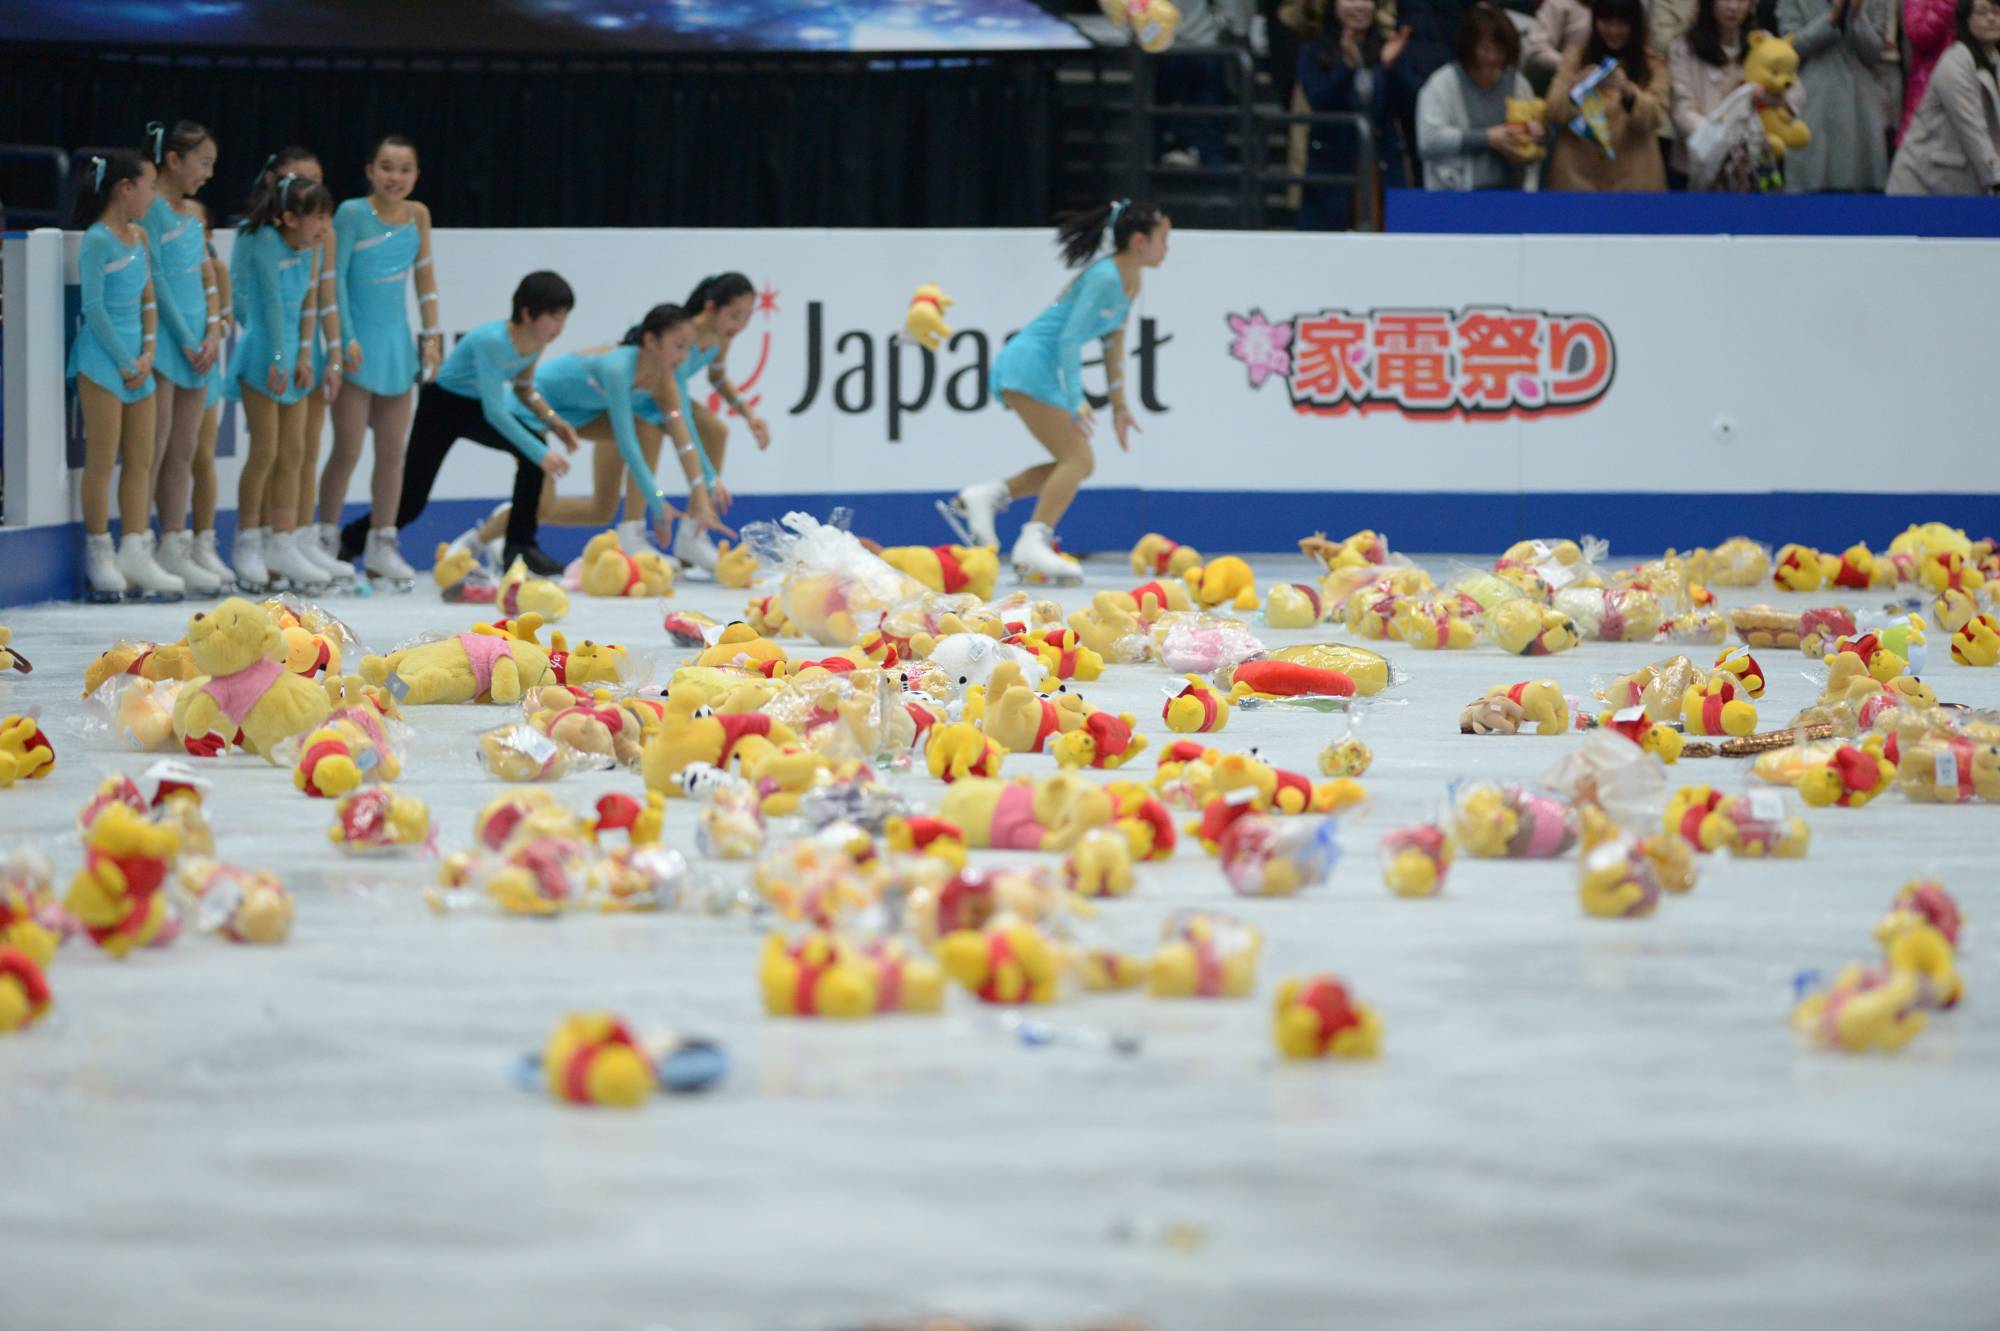 Winnie the Pooh plush toys are thrown onto the ice by fans of Yuzuru Hanyu at tournament in South Korea, February 16, 2020. /CFP